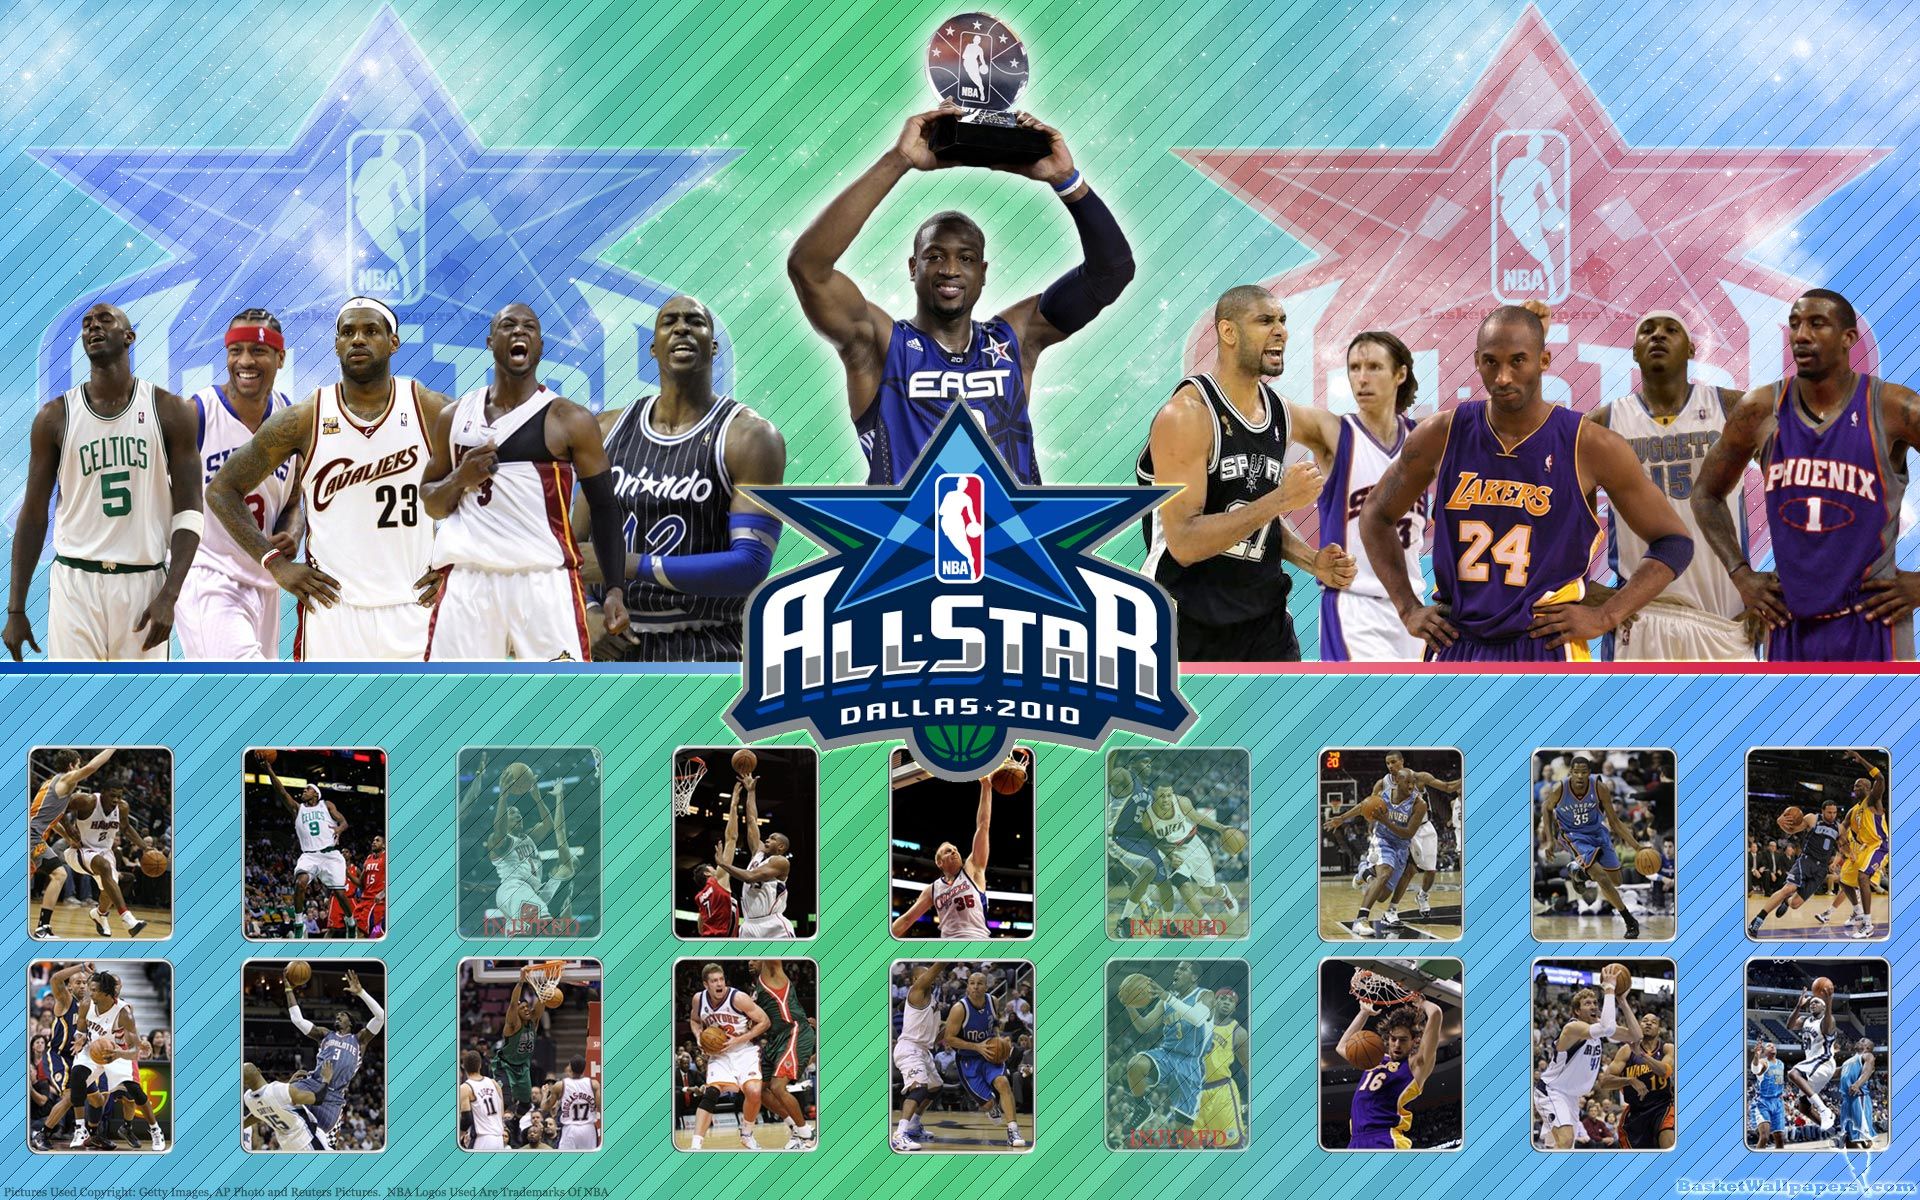 Free download NBA All Star 2010 Rosters Wallpaper Basketball